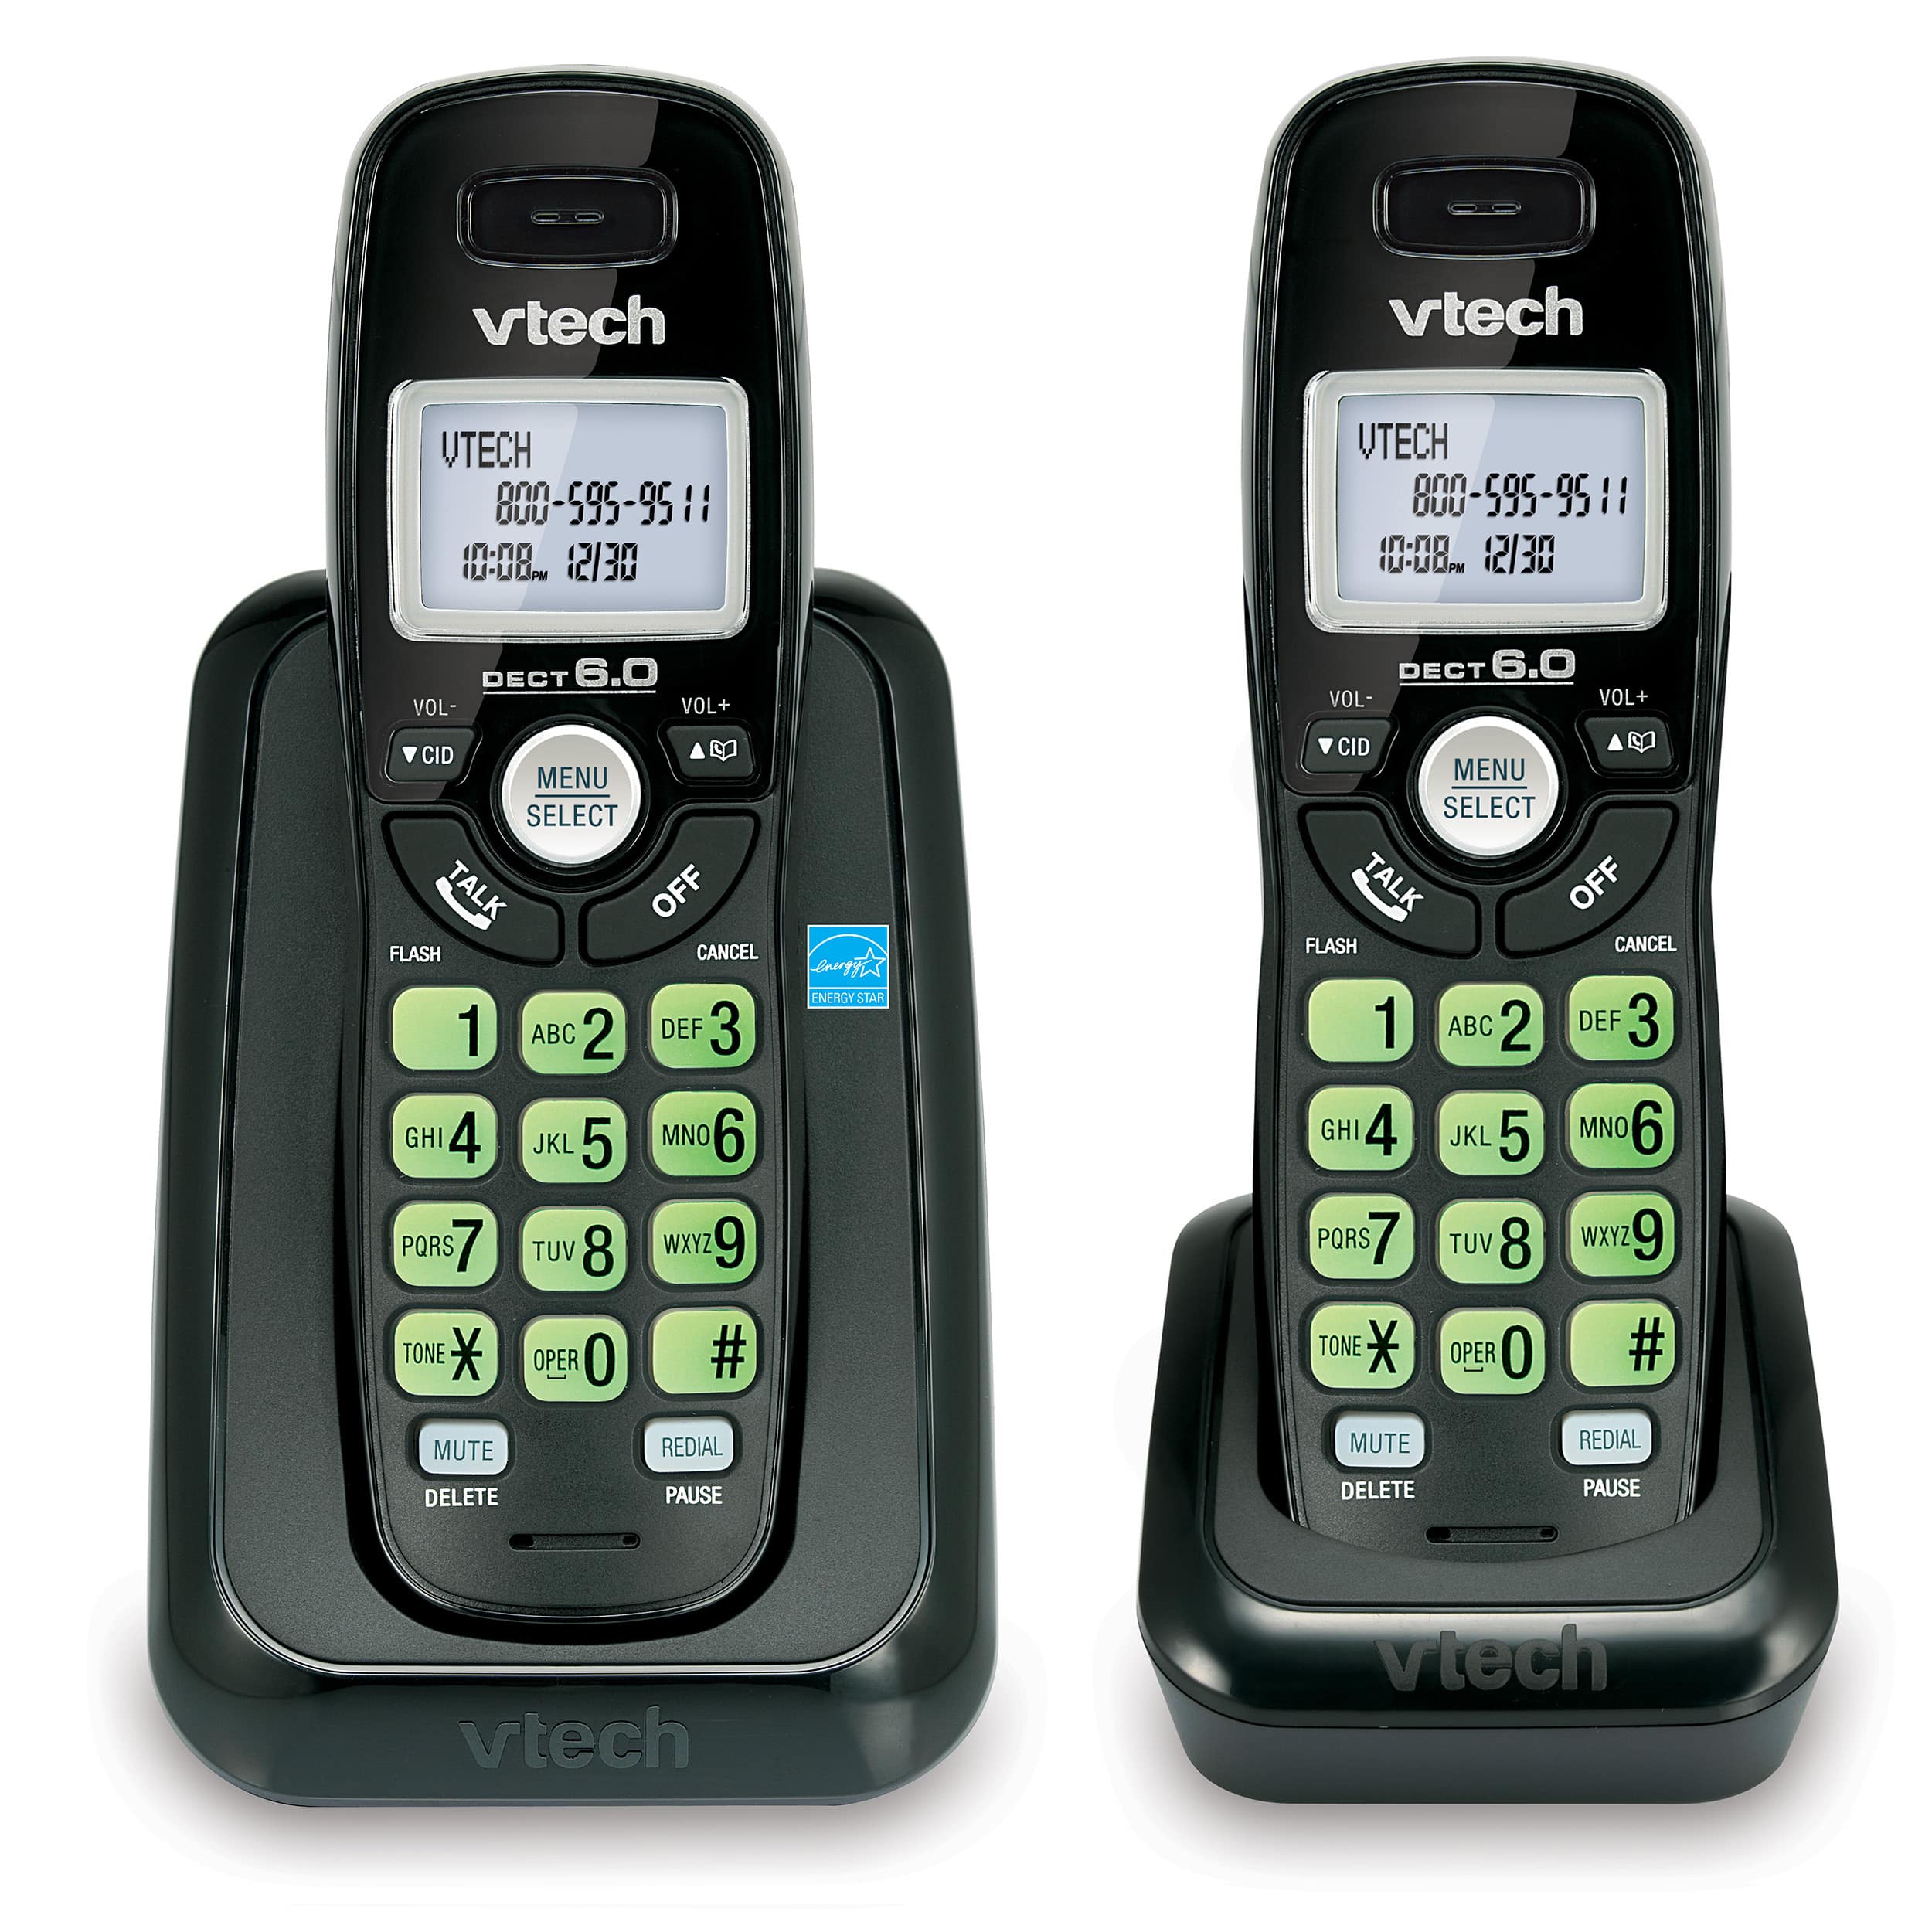 2 Handset Cordless Phone with Caller ID/Call Waiting